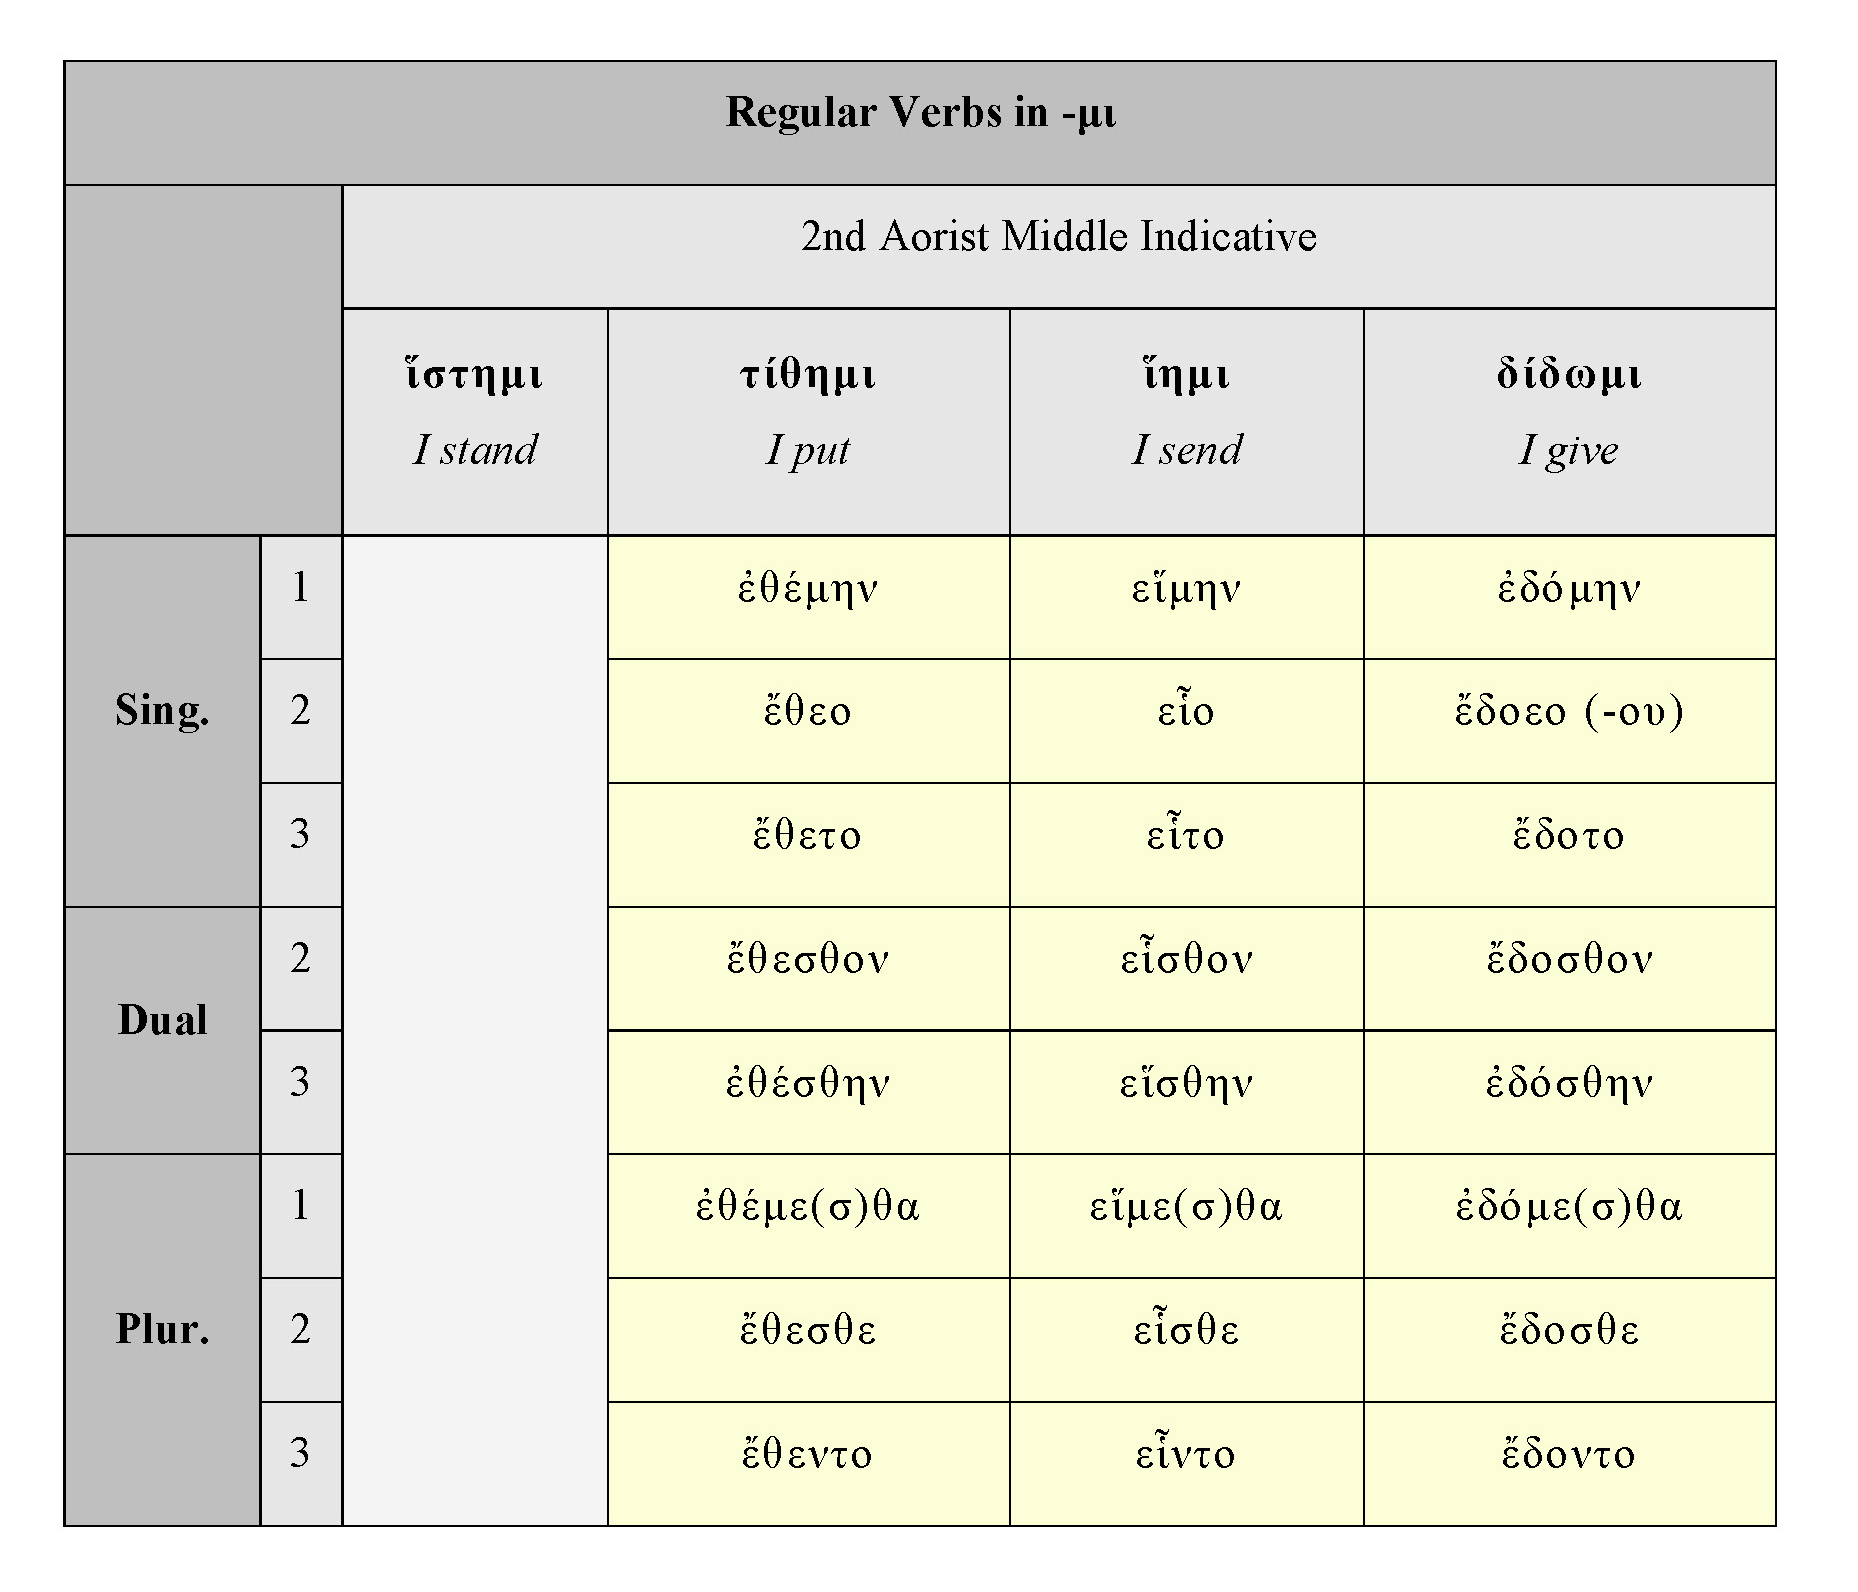 HOMERIC VERBS: -ΜΙ 2ND AORIST MIDDLE INDICATIVE